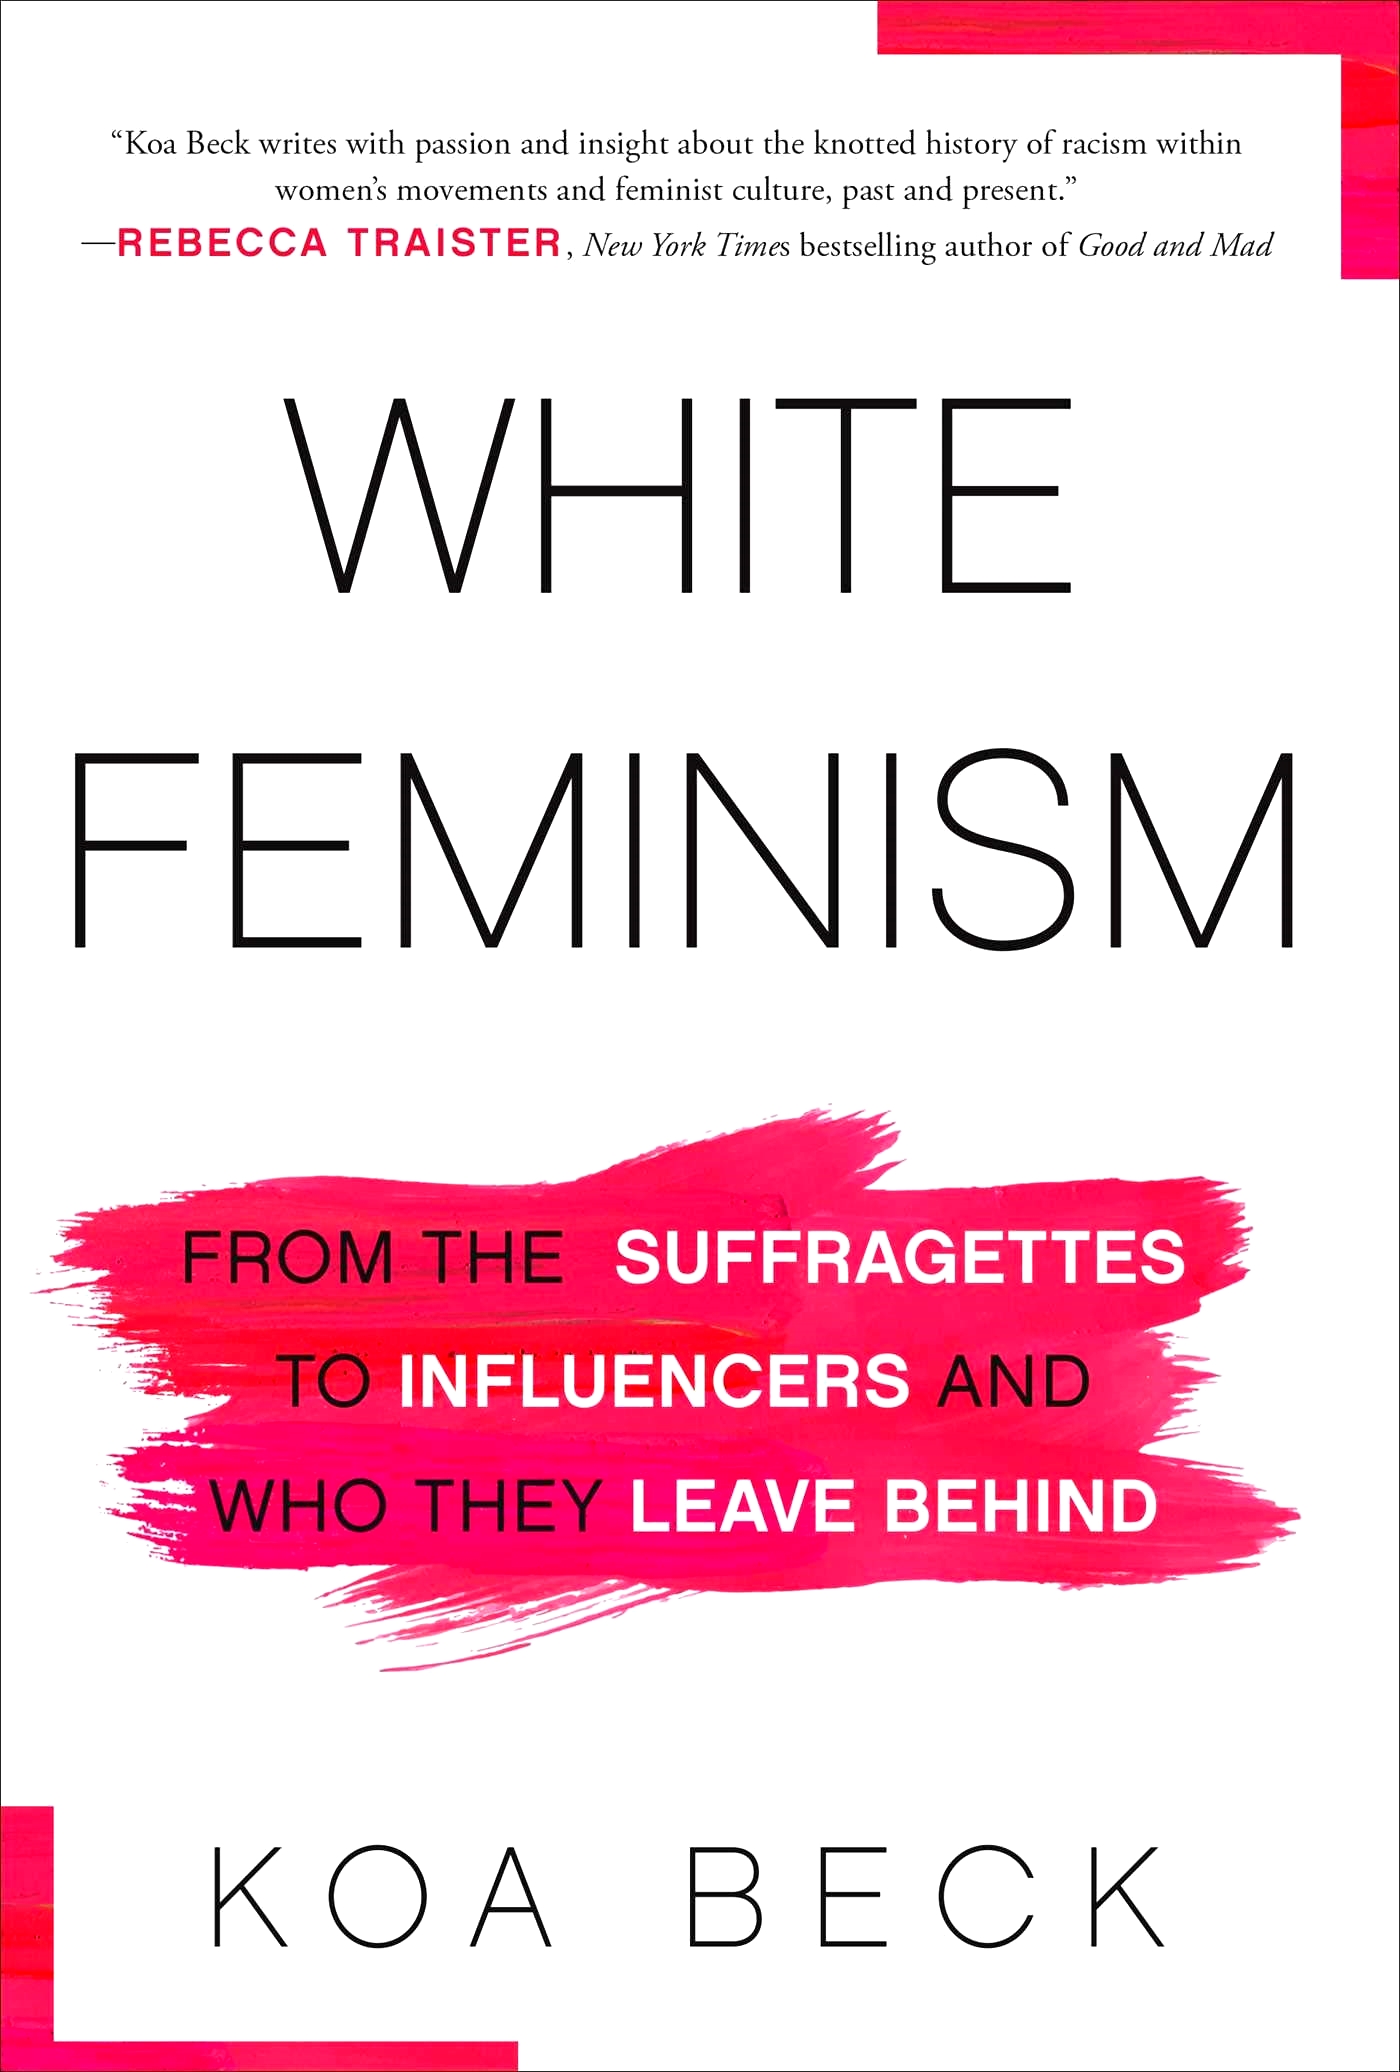 [EPUB] White Feminism: From the Suffragettes to Influencers and Who They Leave Behind by Koa Beck